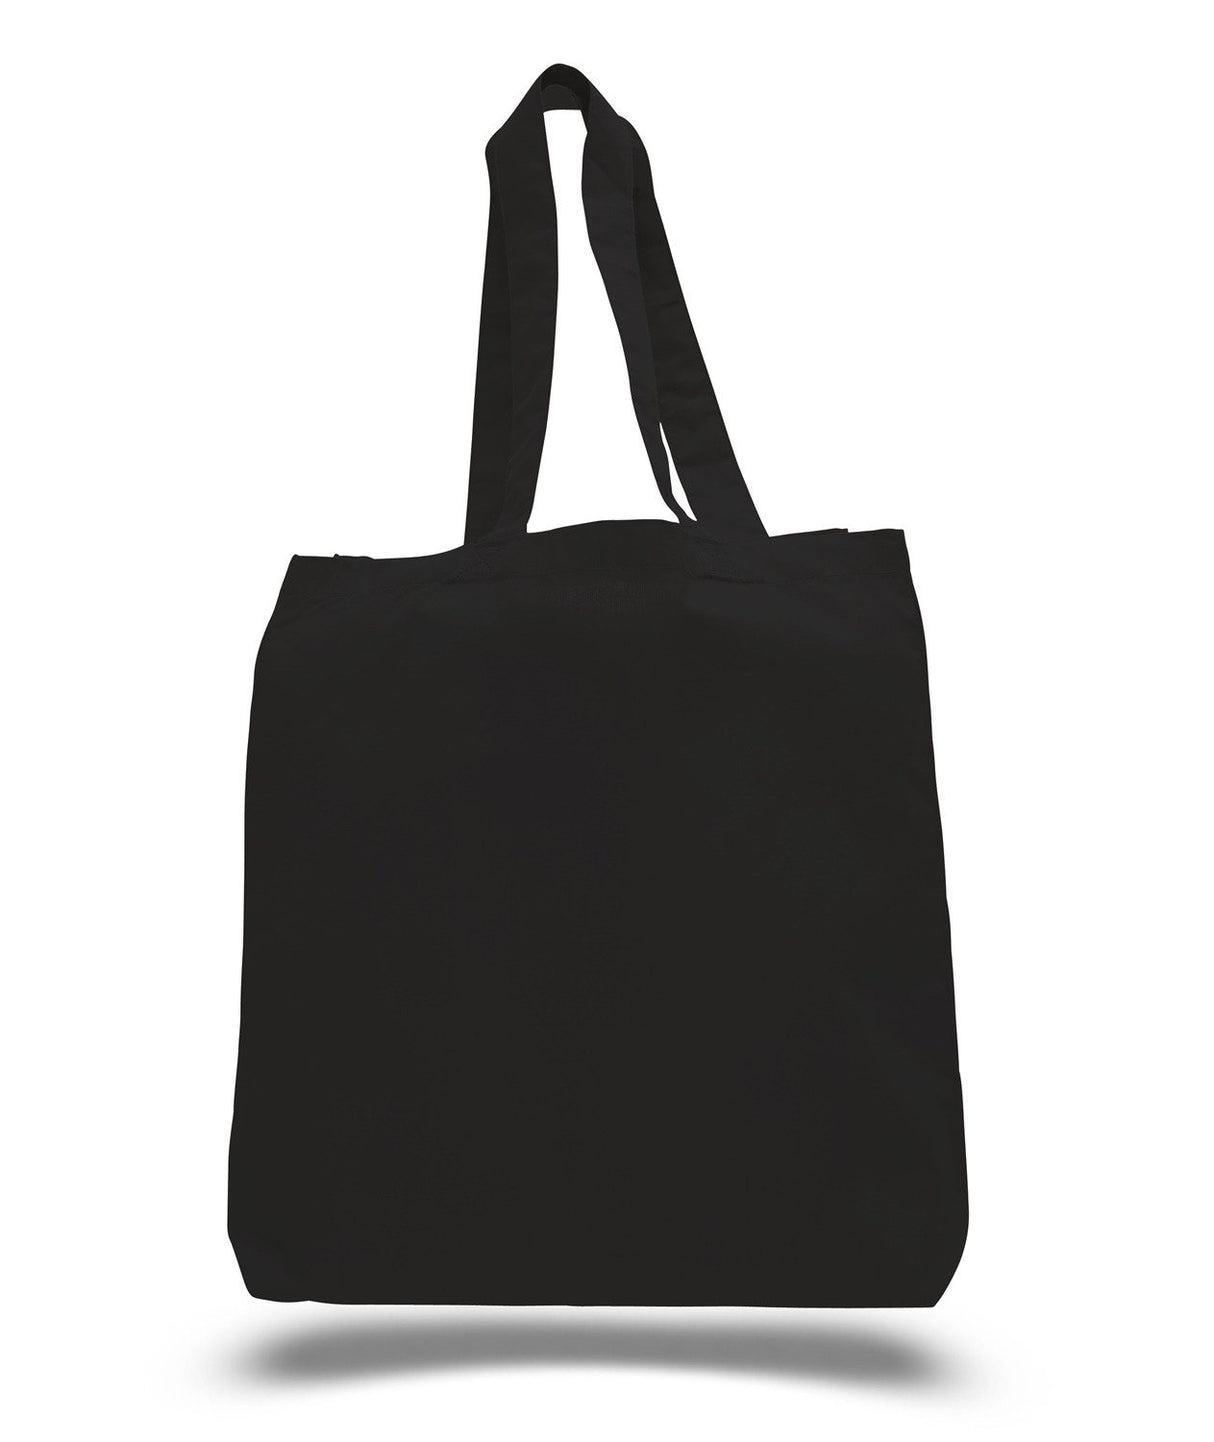 Cheap Cotton Tote Bags Gusset in Black